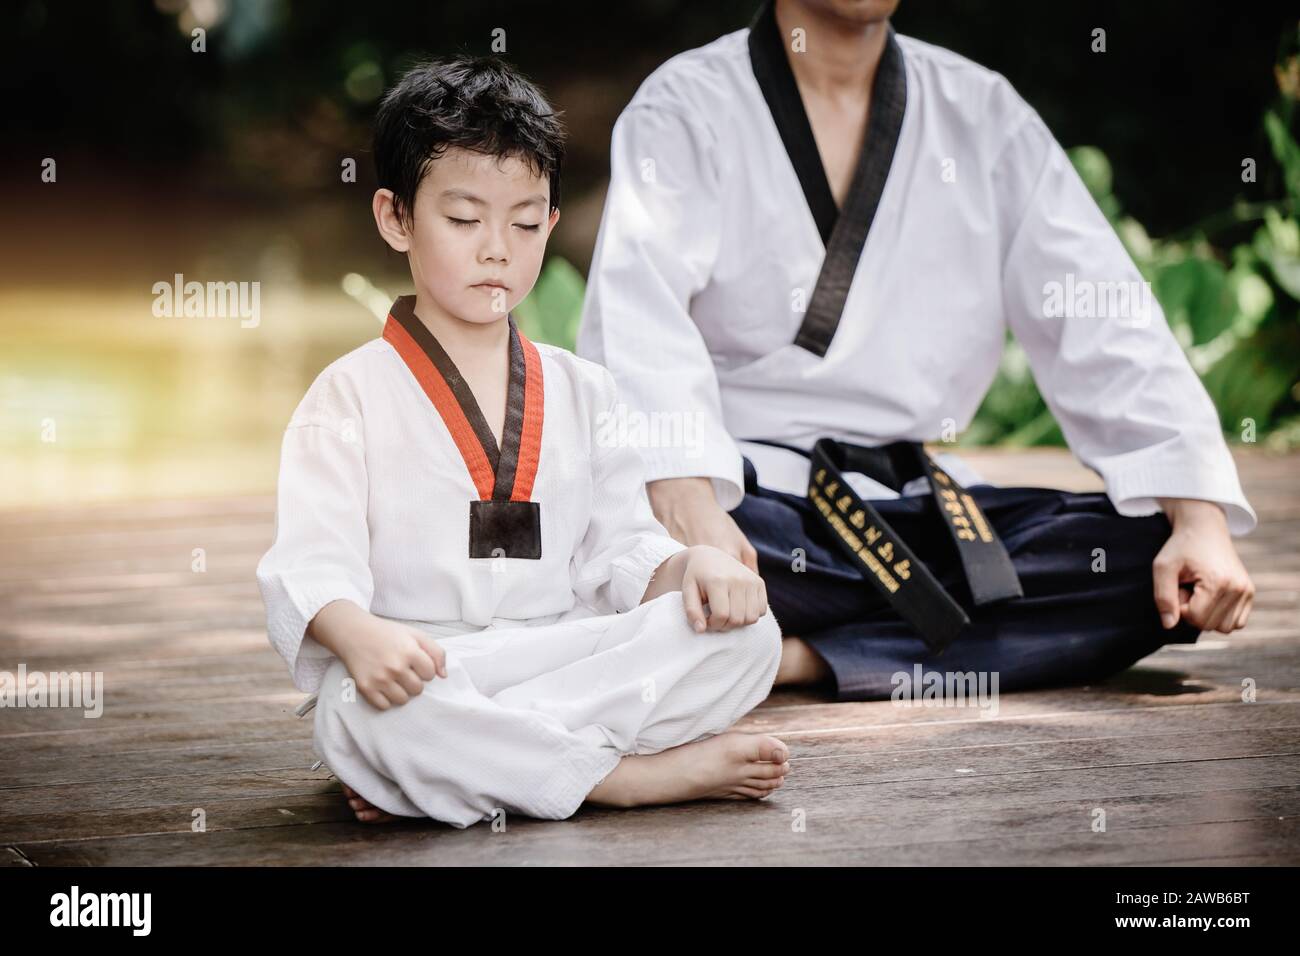 Fighter kid in Taekwondo uniform sitting concentration for training self defense body and mild. Stock Photo